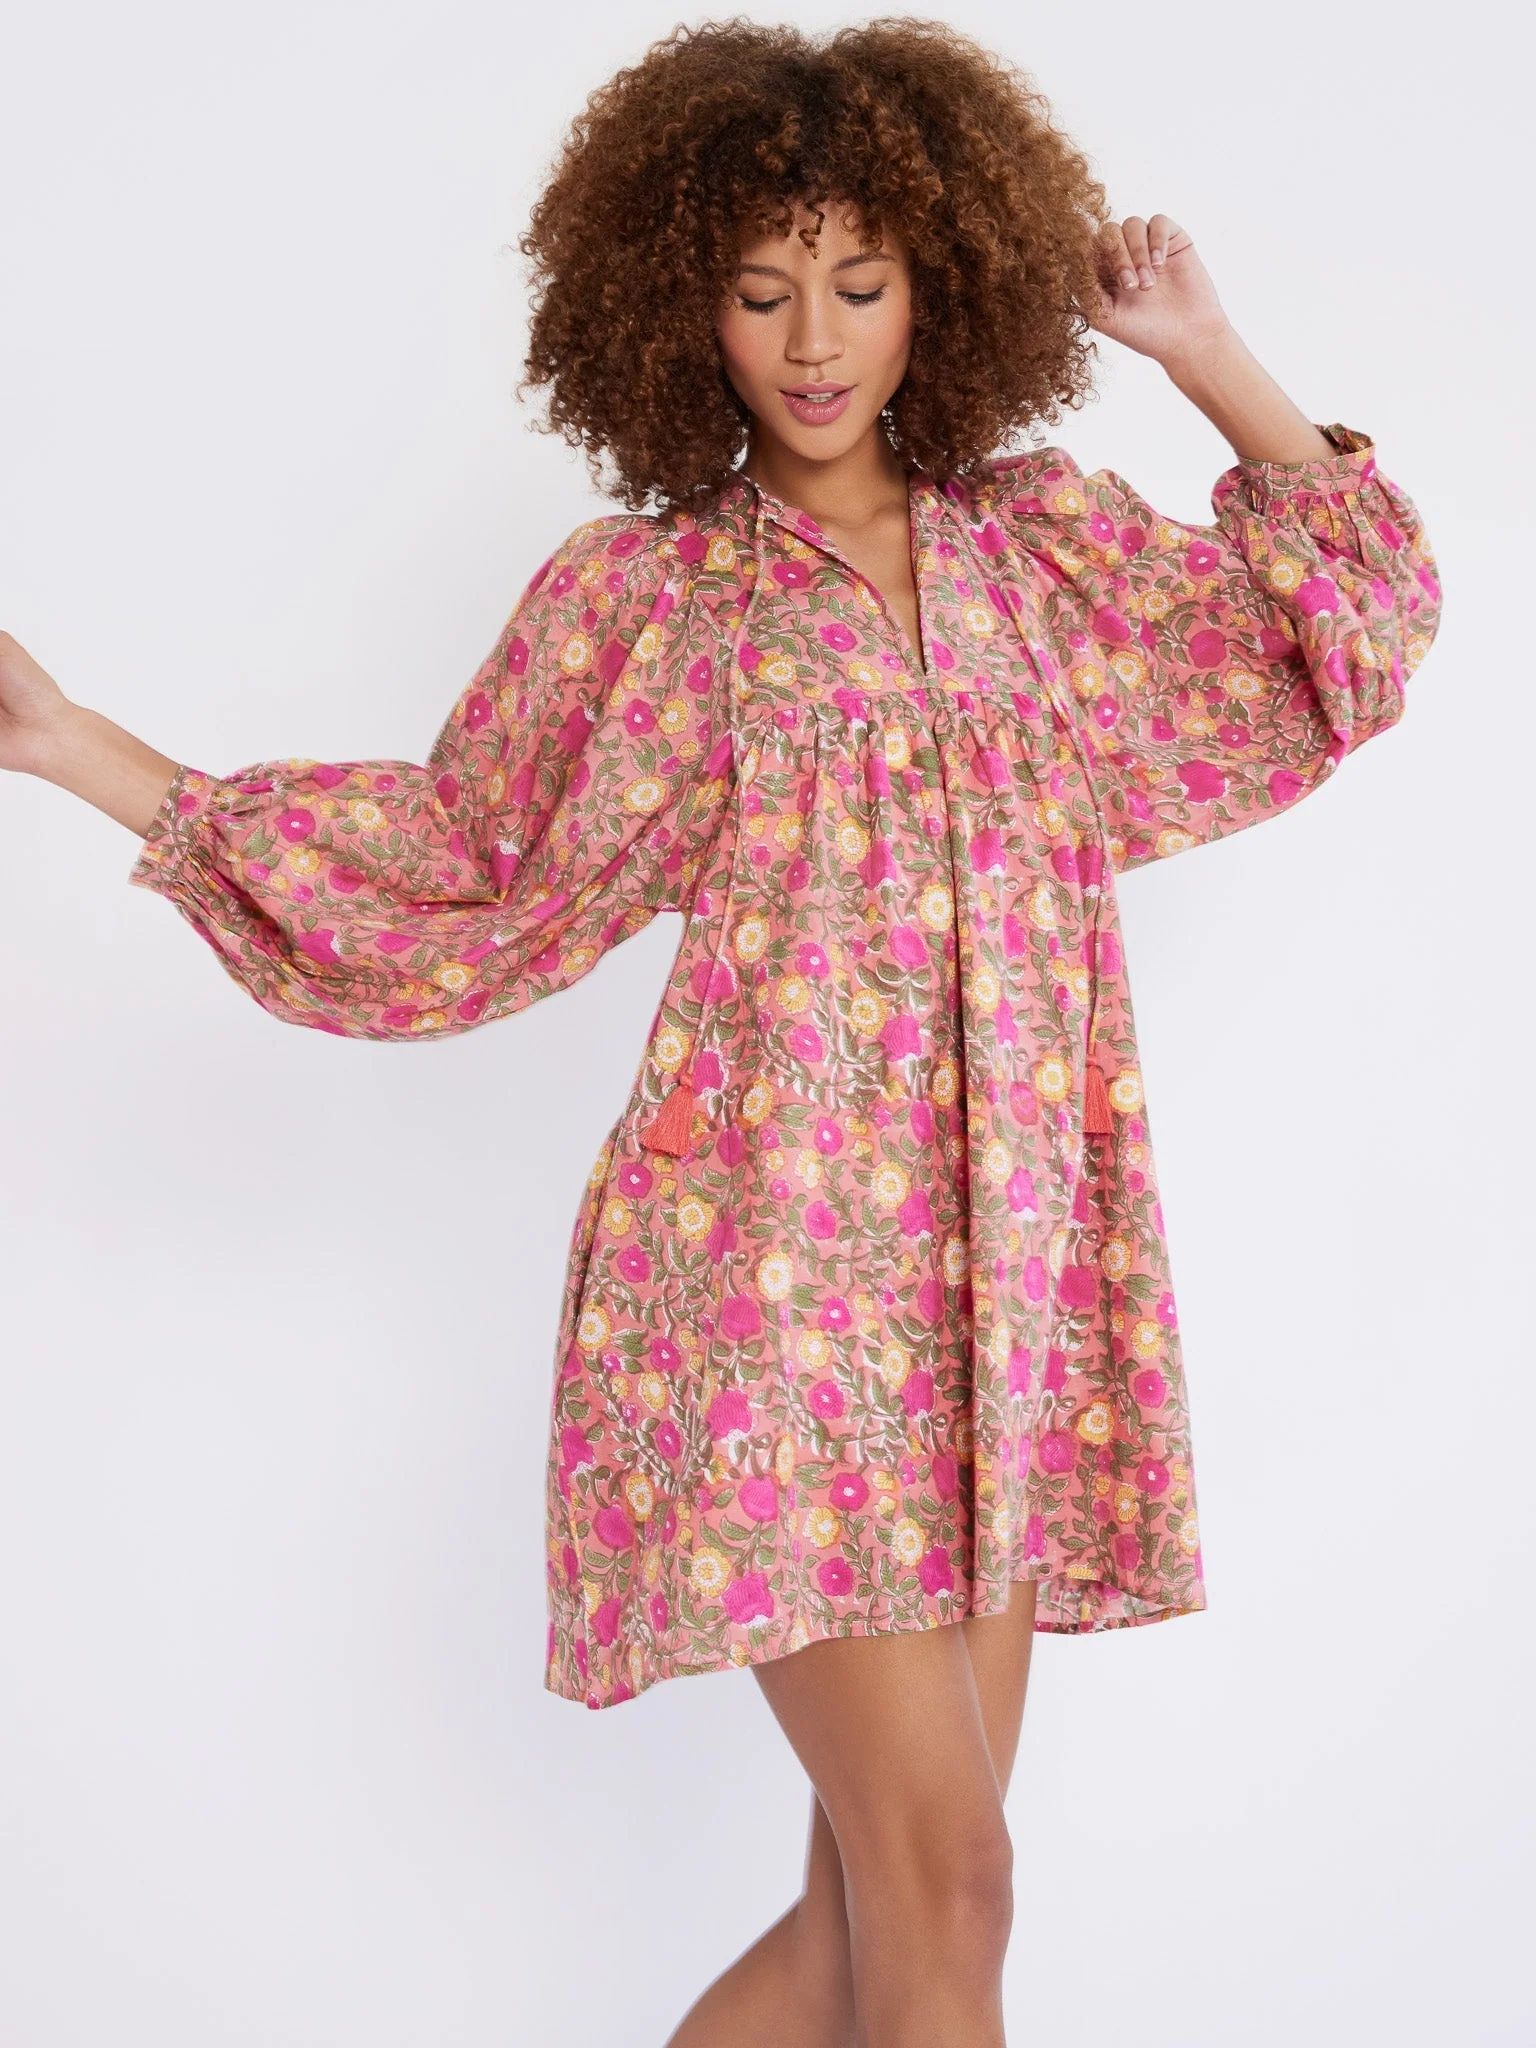 Shop Mille - Daisy Dress in Passionfruit | Mille